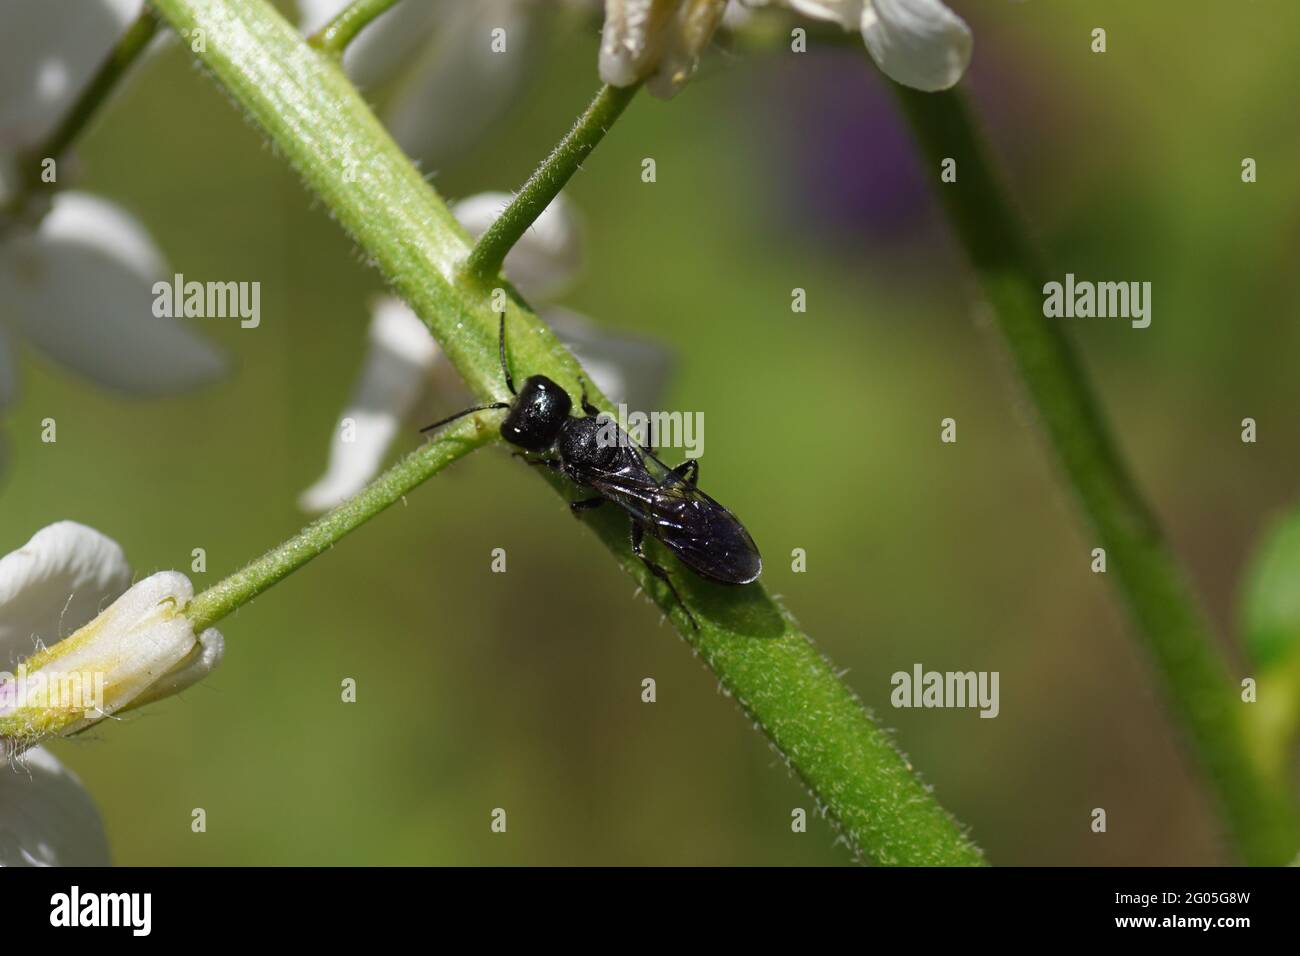 Black Aphid Wasp (Pemphredon spec). Family: Crabronidae looking for prey on a plant. Dame's rocket (Hesperis matronalis). Dutch garden, spring, May, Stock Photo